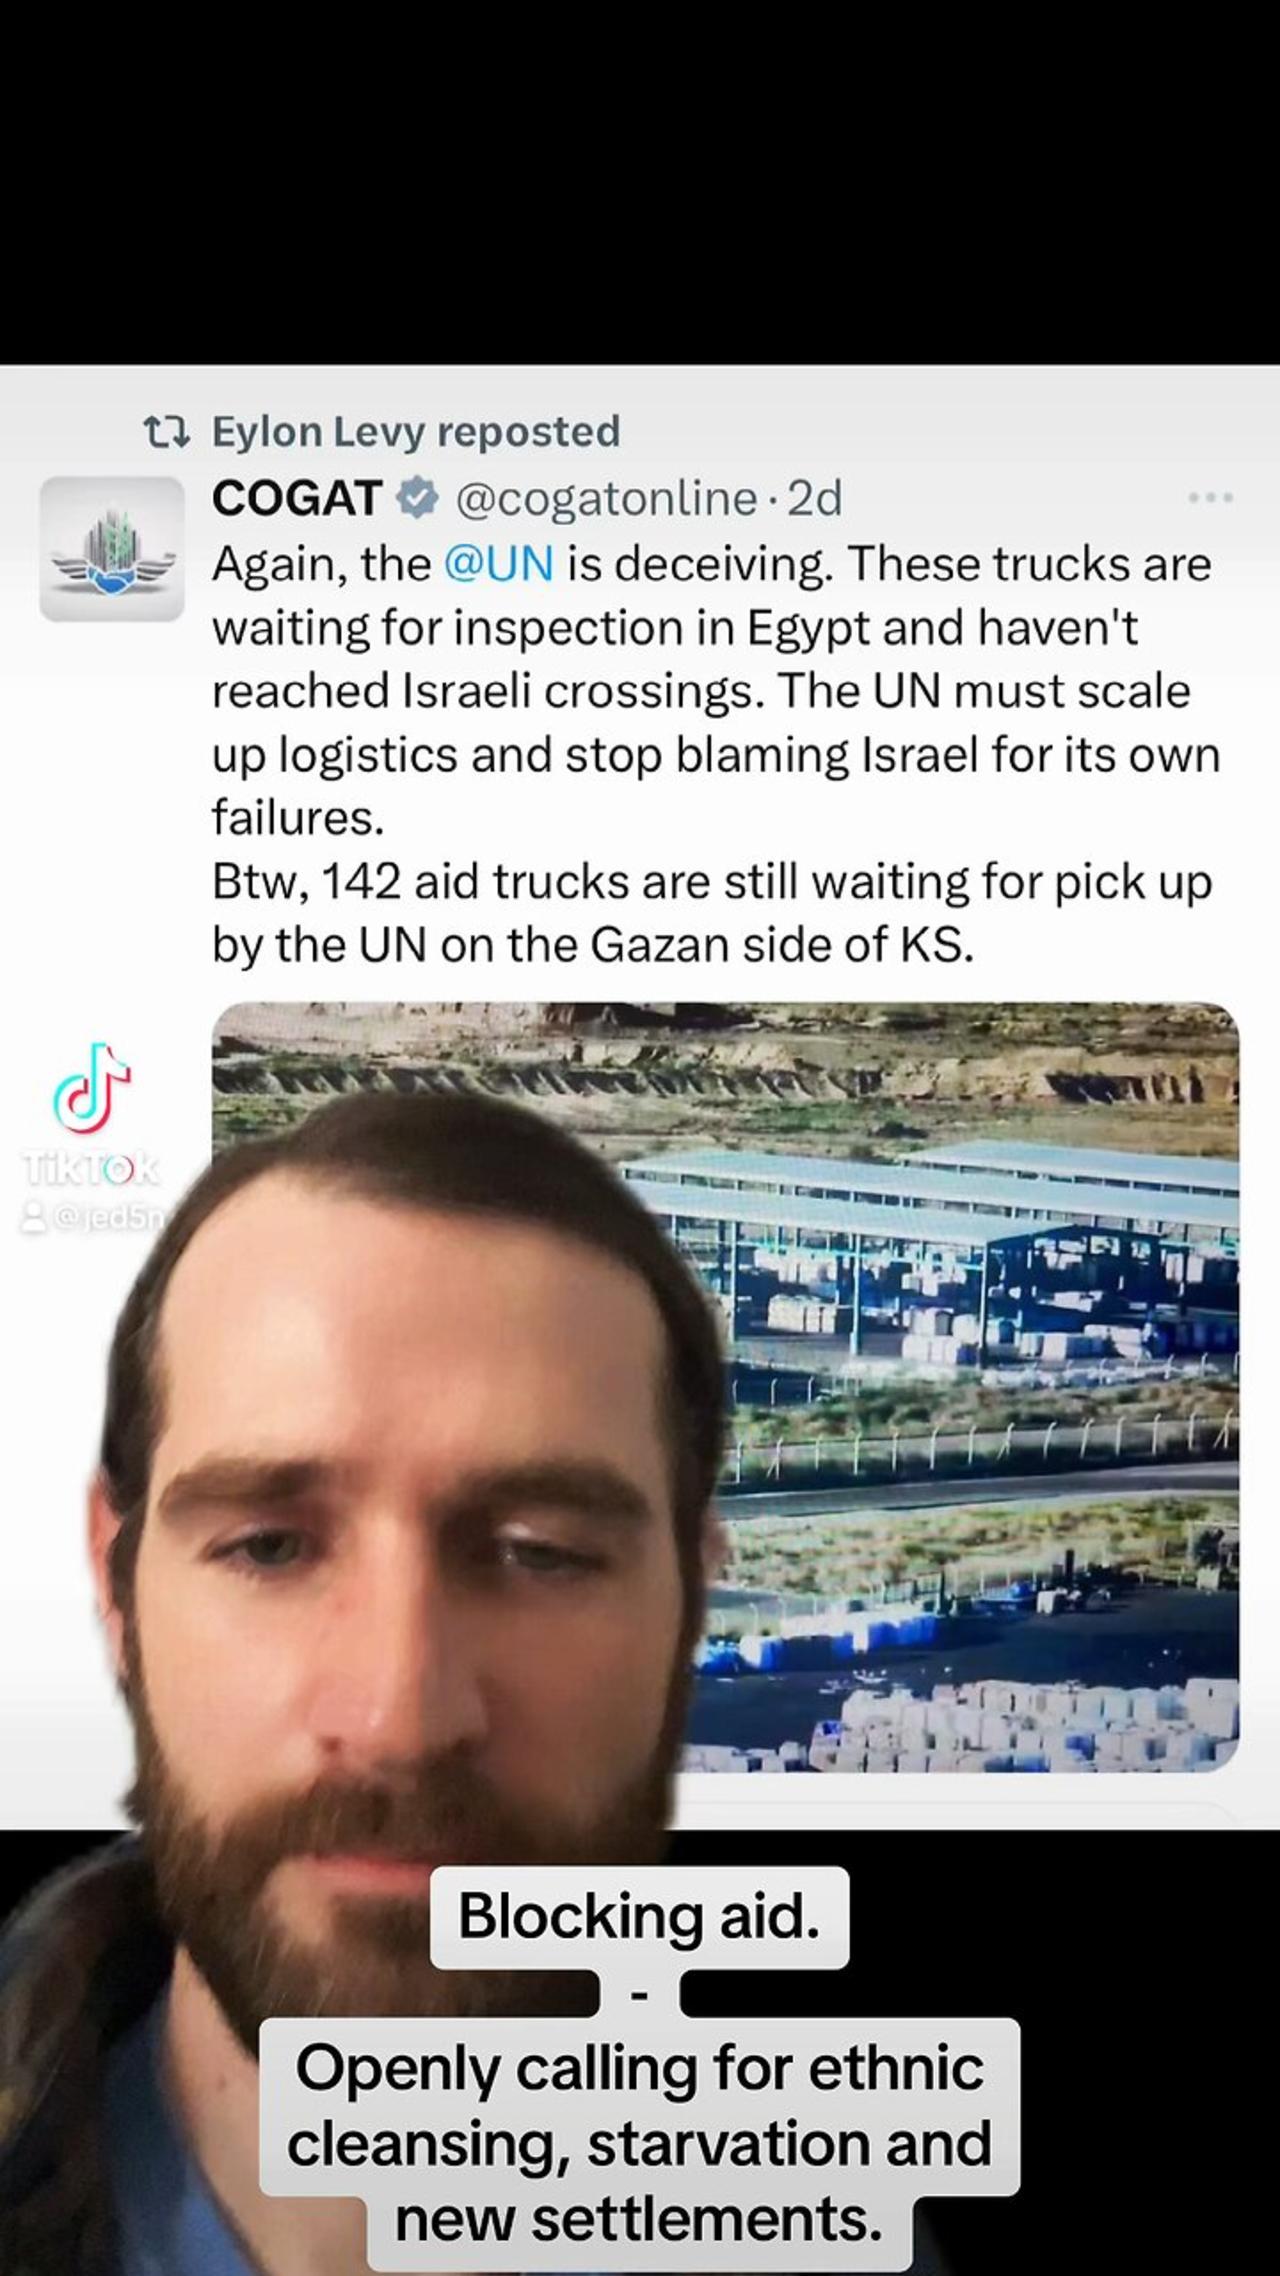 Proof that Israel is blocking aid.